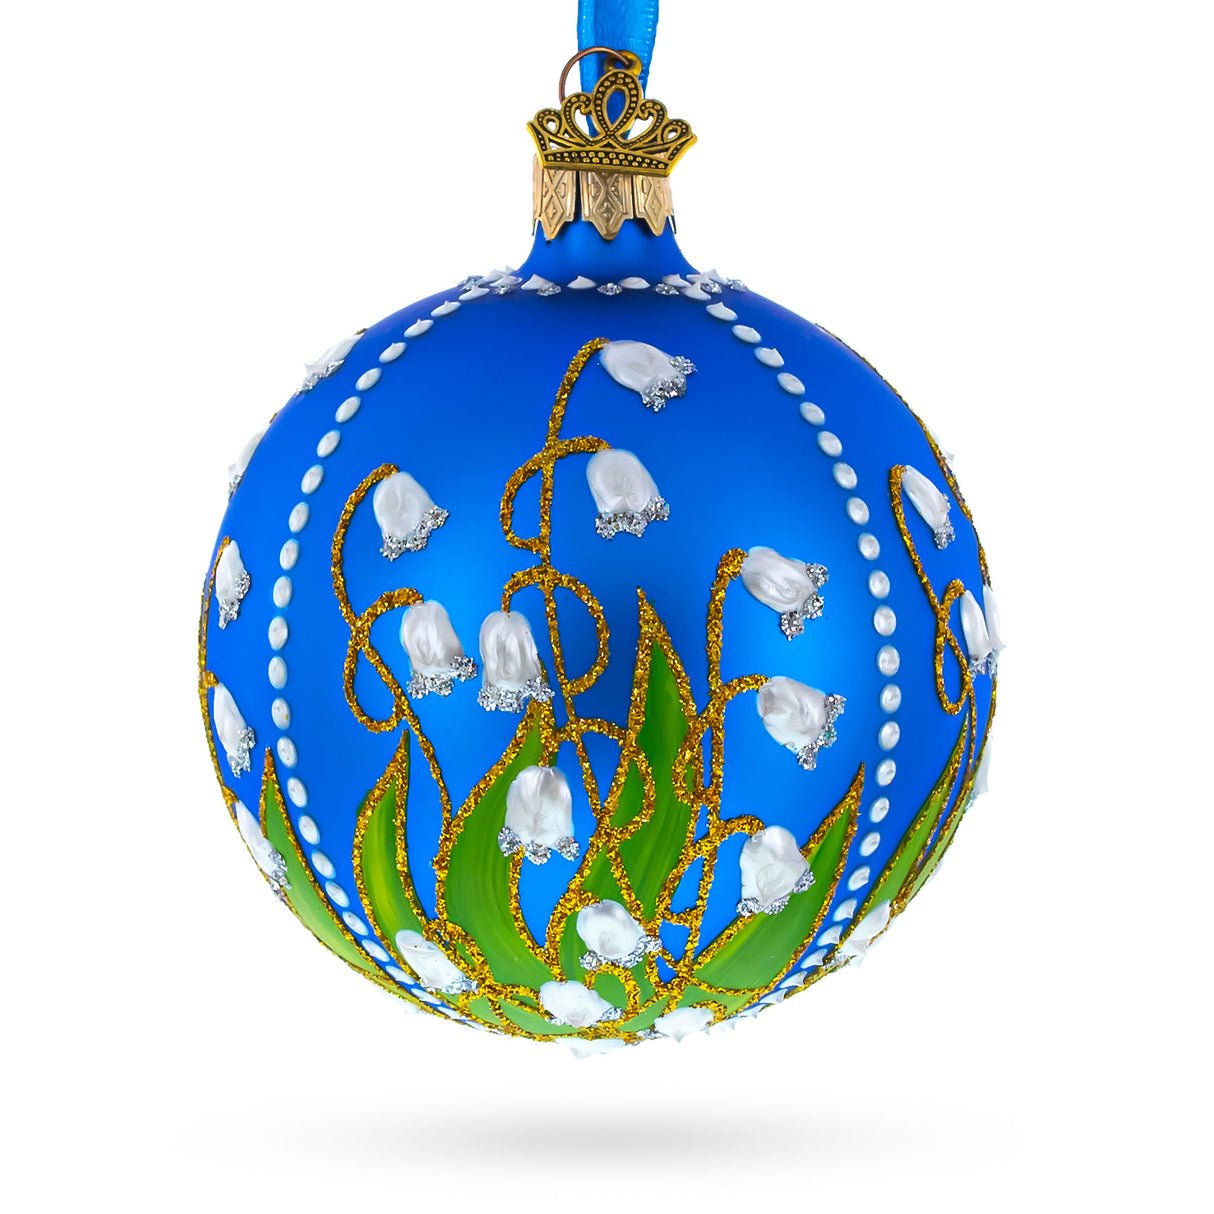 Glass Delicate Lilies of the Valley on Blue Blown Glass Ball Christmas Ornament 3.25 Inches in Blue color Round